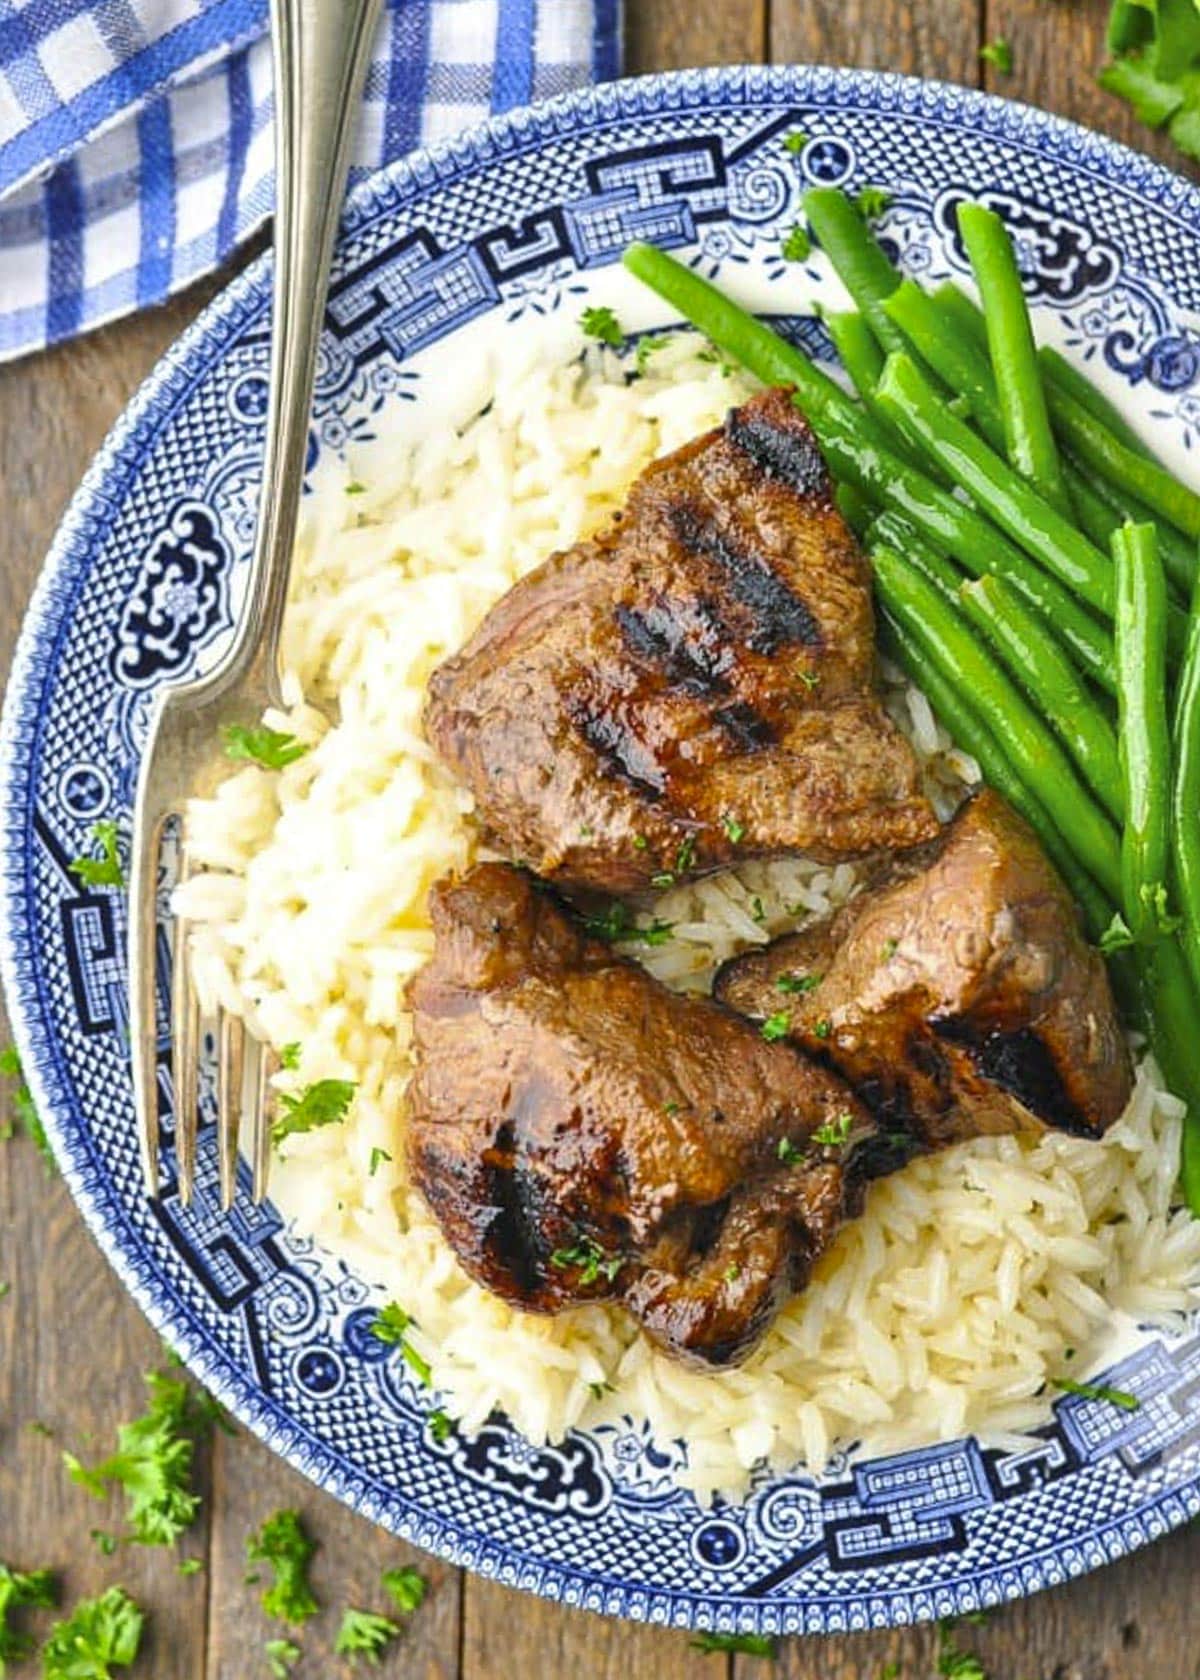 Marinated grilled steak tip recipe served on rice with a side of green beans.